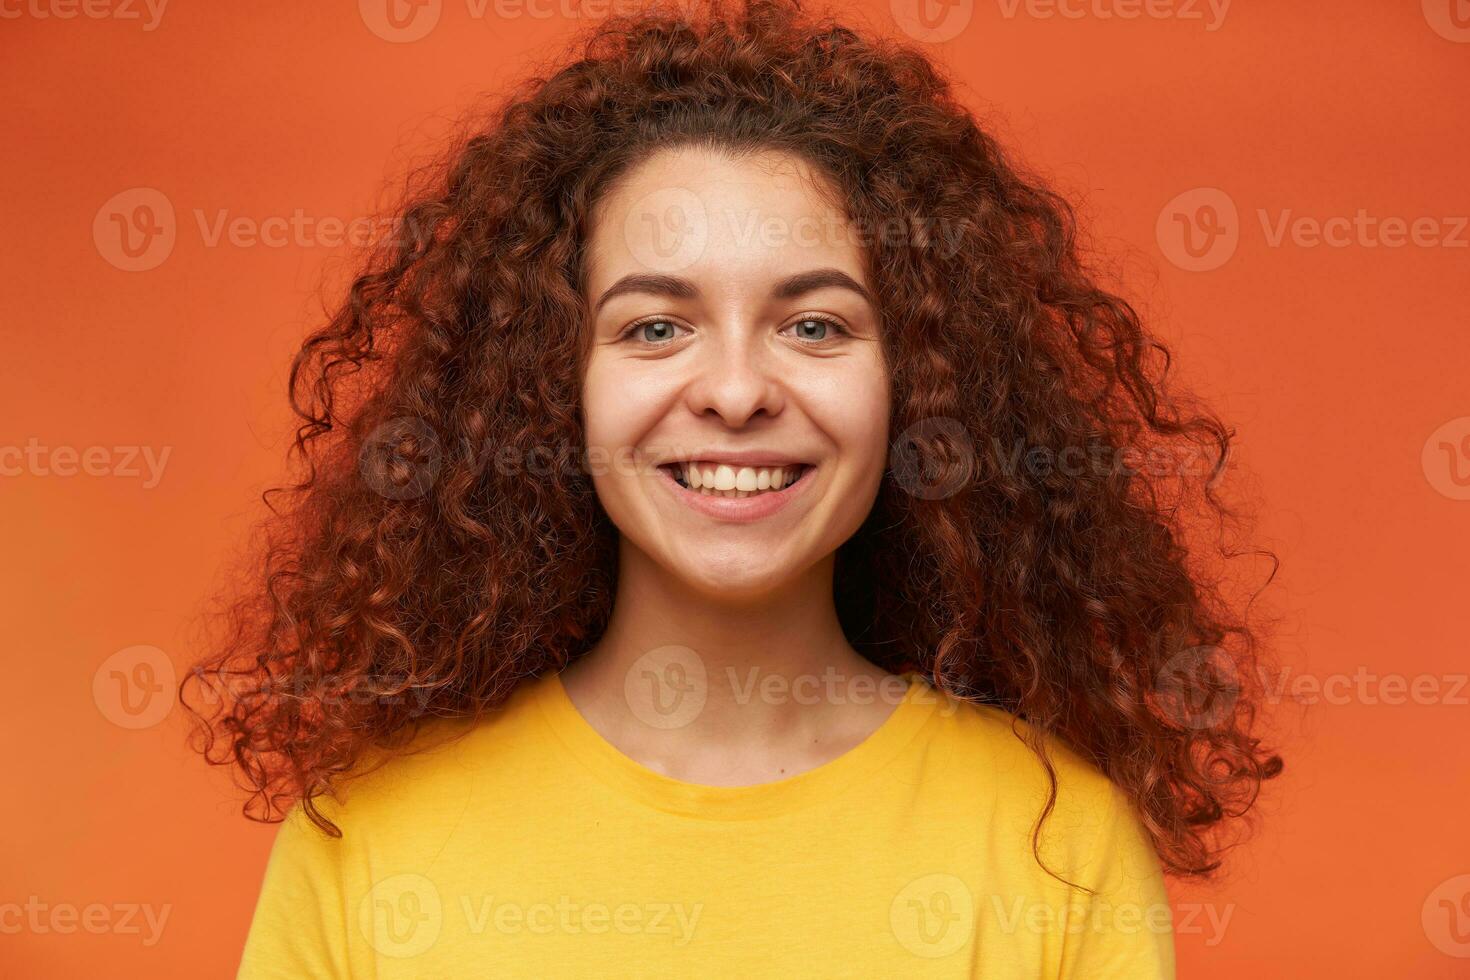 Teenage girl, happy looking woman with ginger curly hair. Wearing yellow t-shirt. People and emotion concept. Watching at the camera with toothy smile, close up, isolated over orange background photo